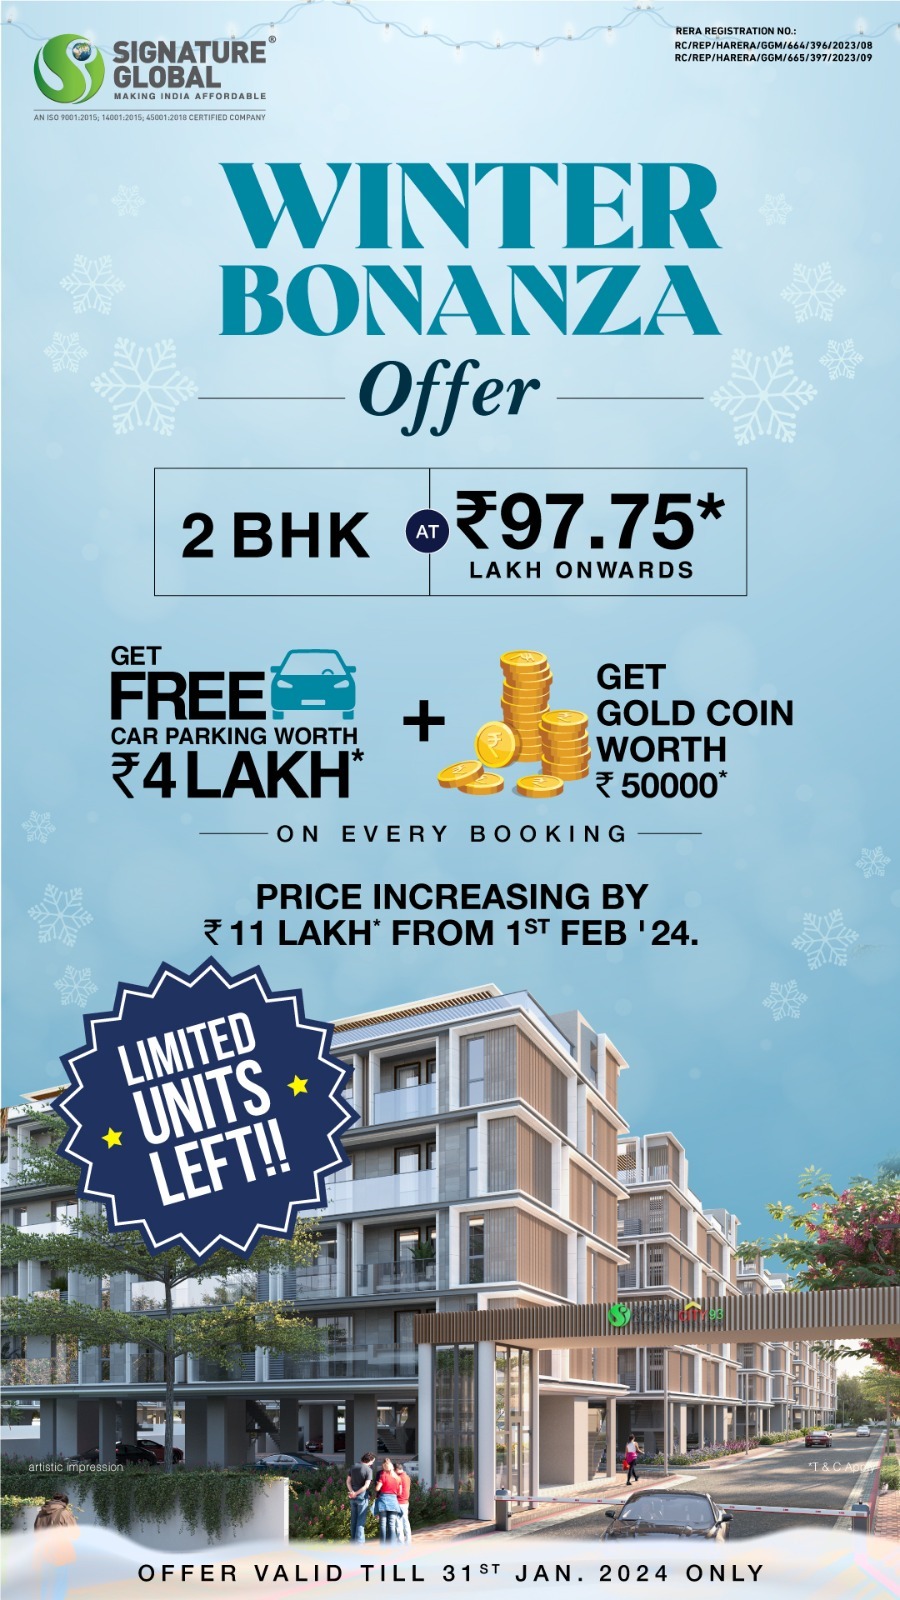 Signature Global's Winter Bonanza Offer on Select 2 BHK Apartments in Gurgaon Update